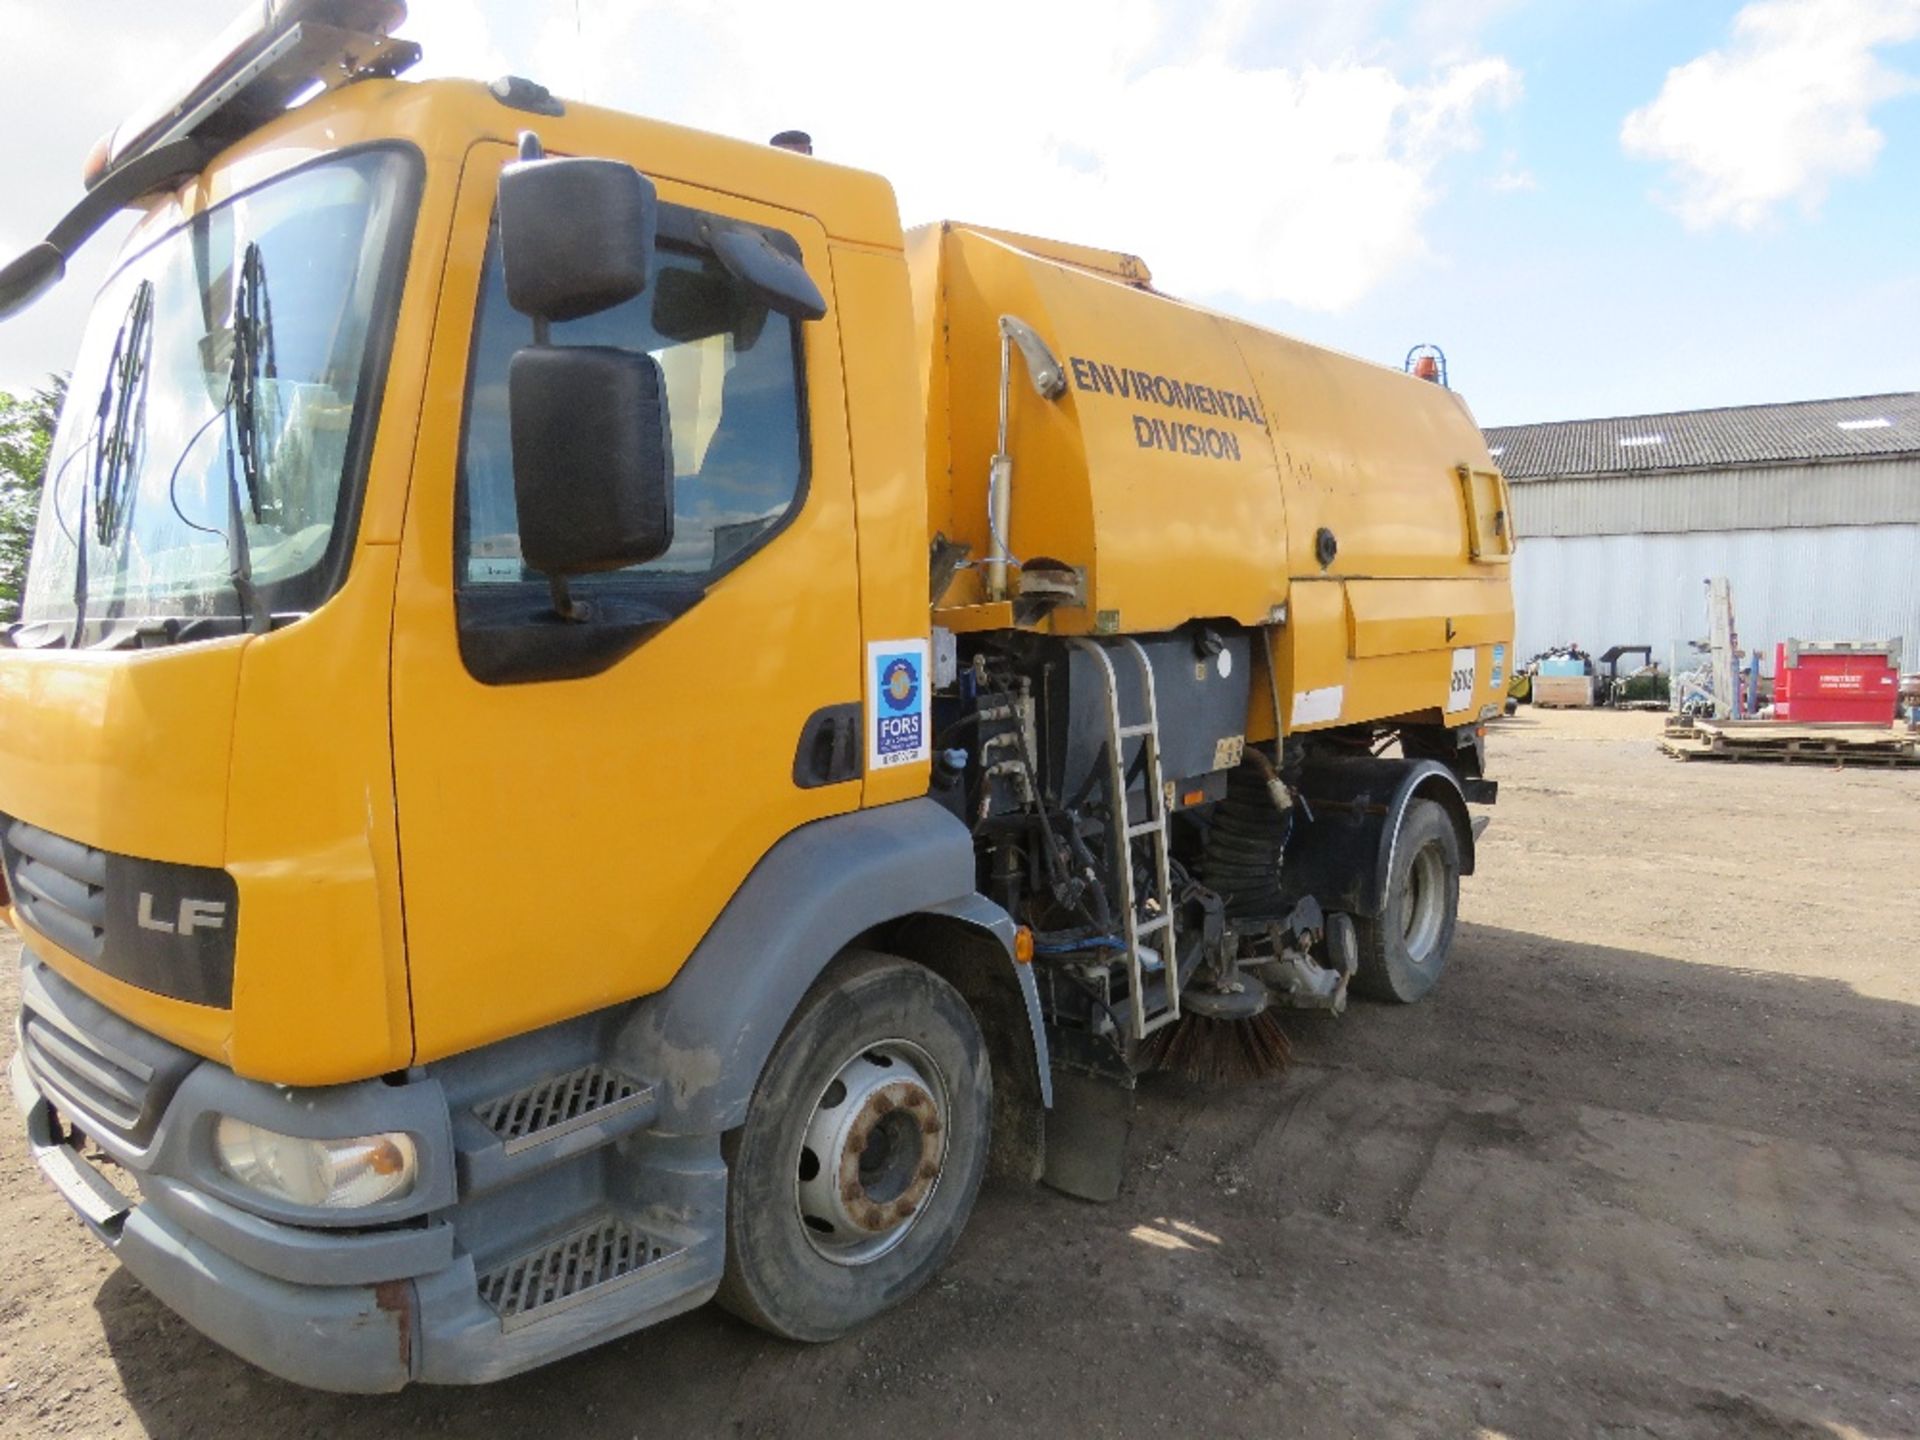 DAF LF JOHNSON ROAD SWEEPER REG:KE57 HLO. 131,934 REC KMS. WITH V5. MOT EXPIRED. FROM LOCAL COMPANY - Image 2 of 20